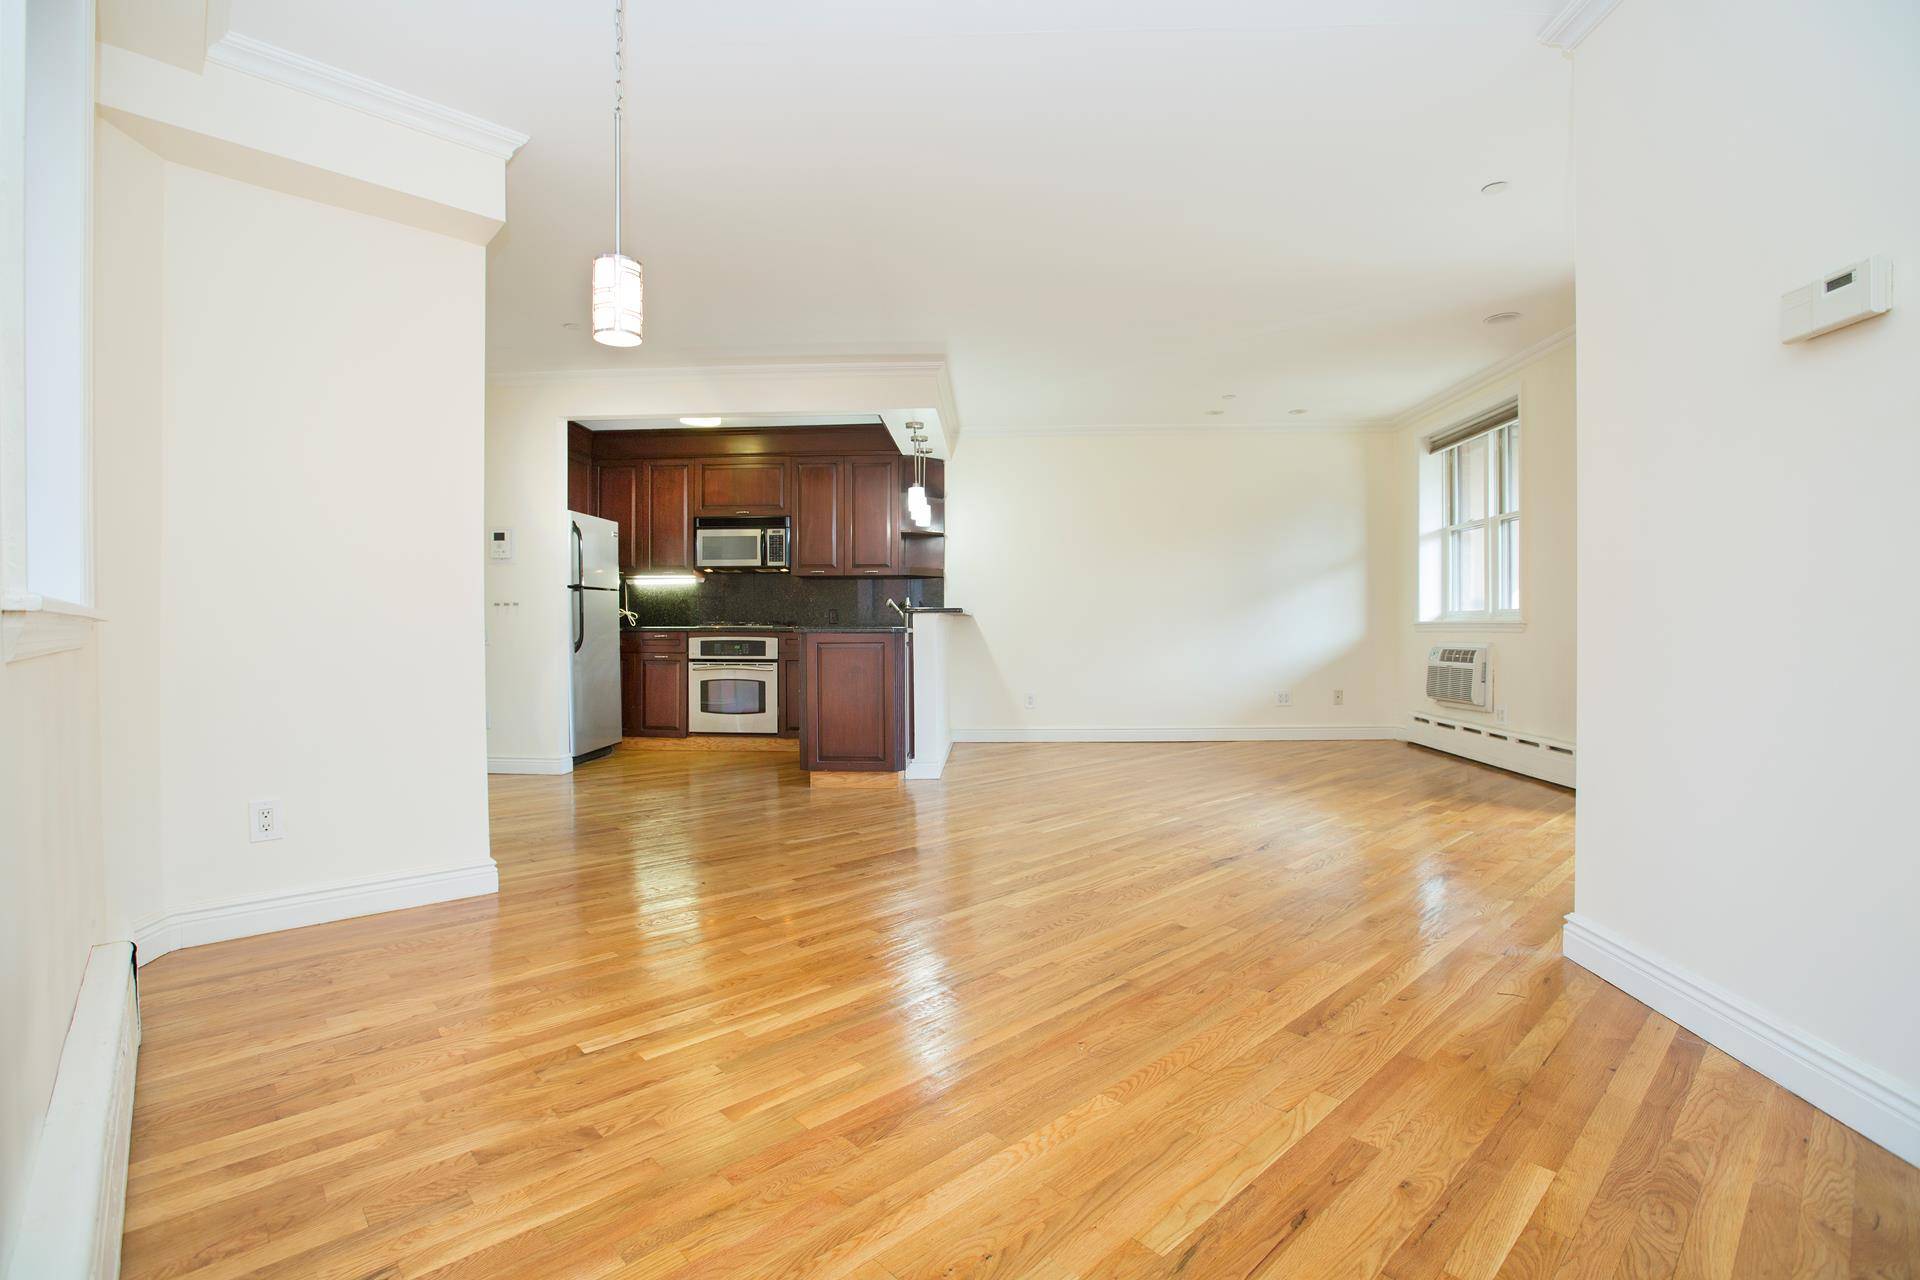 IN PERSON SHOWING AVAILABLE BY APPT ONLY Newly listed, spacious and bright, 2 bedroom 1.